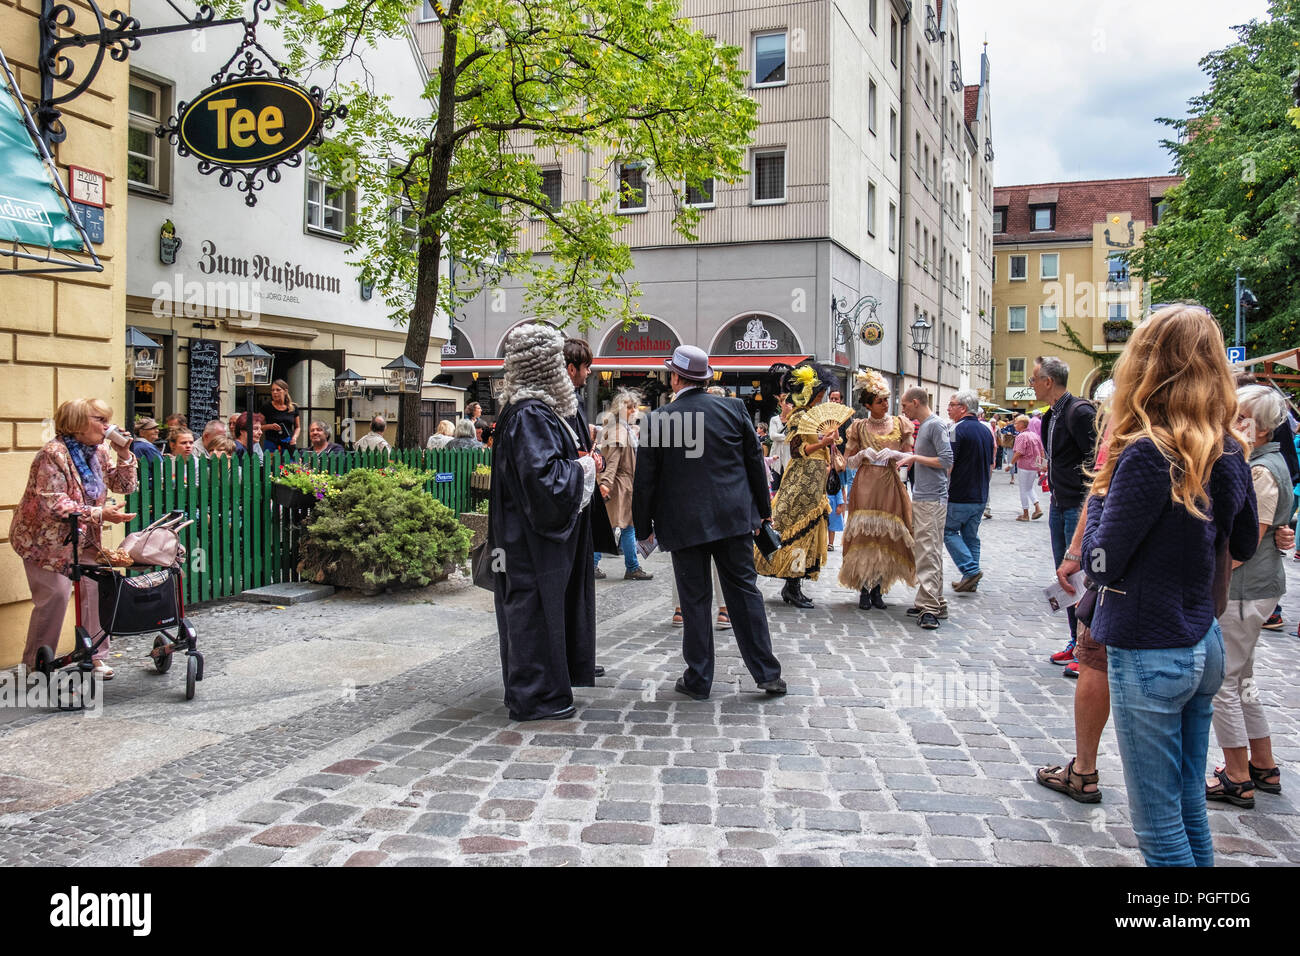 Berlin, Germany. 25 August 2018.  Nikolai Festival, Nikolaifestpiele, historic festival relates the history of Berlin from the Rococo to the Industrial era. The fifth Nikolai Festival entertains with street music, plays & poetry and people wearing period dress visit the Nikolai quarter. The historic market square has numerous stalls displaying traditional crafts and goods. Credit: Eden Breitz/Alamy Live News Stock Photo